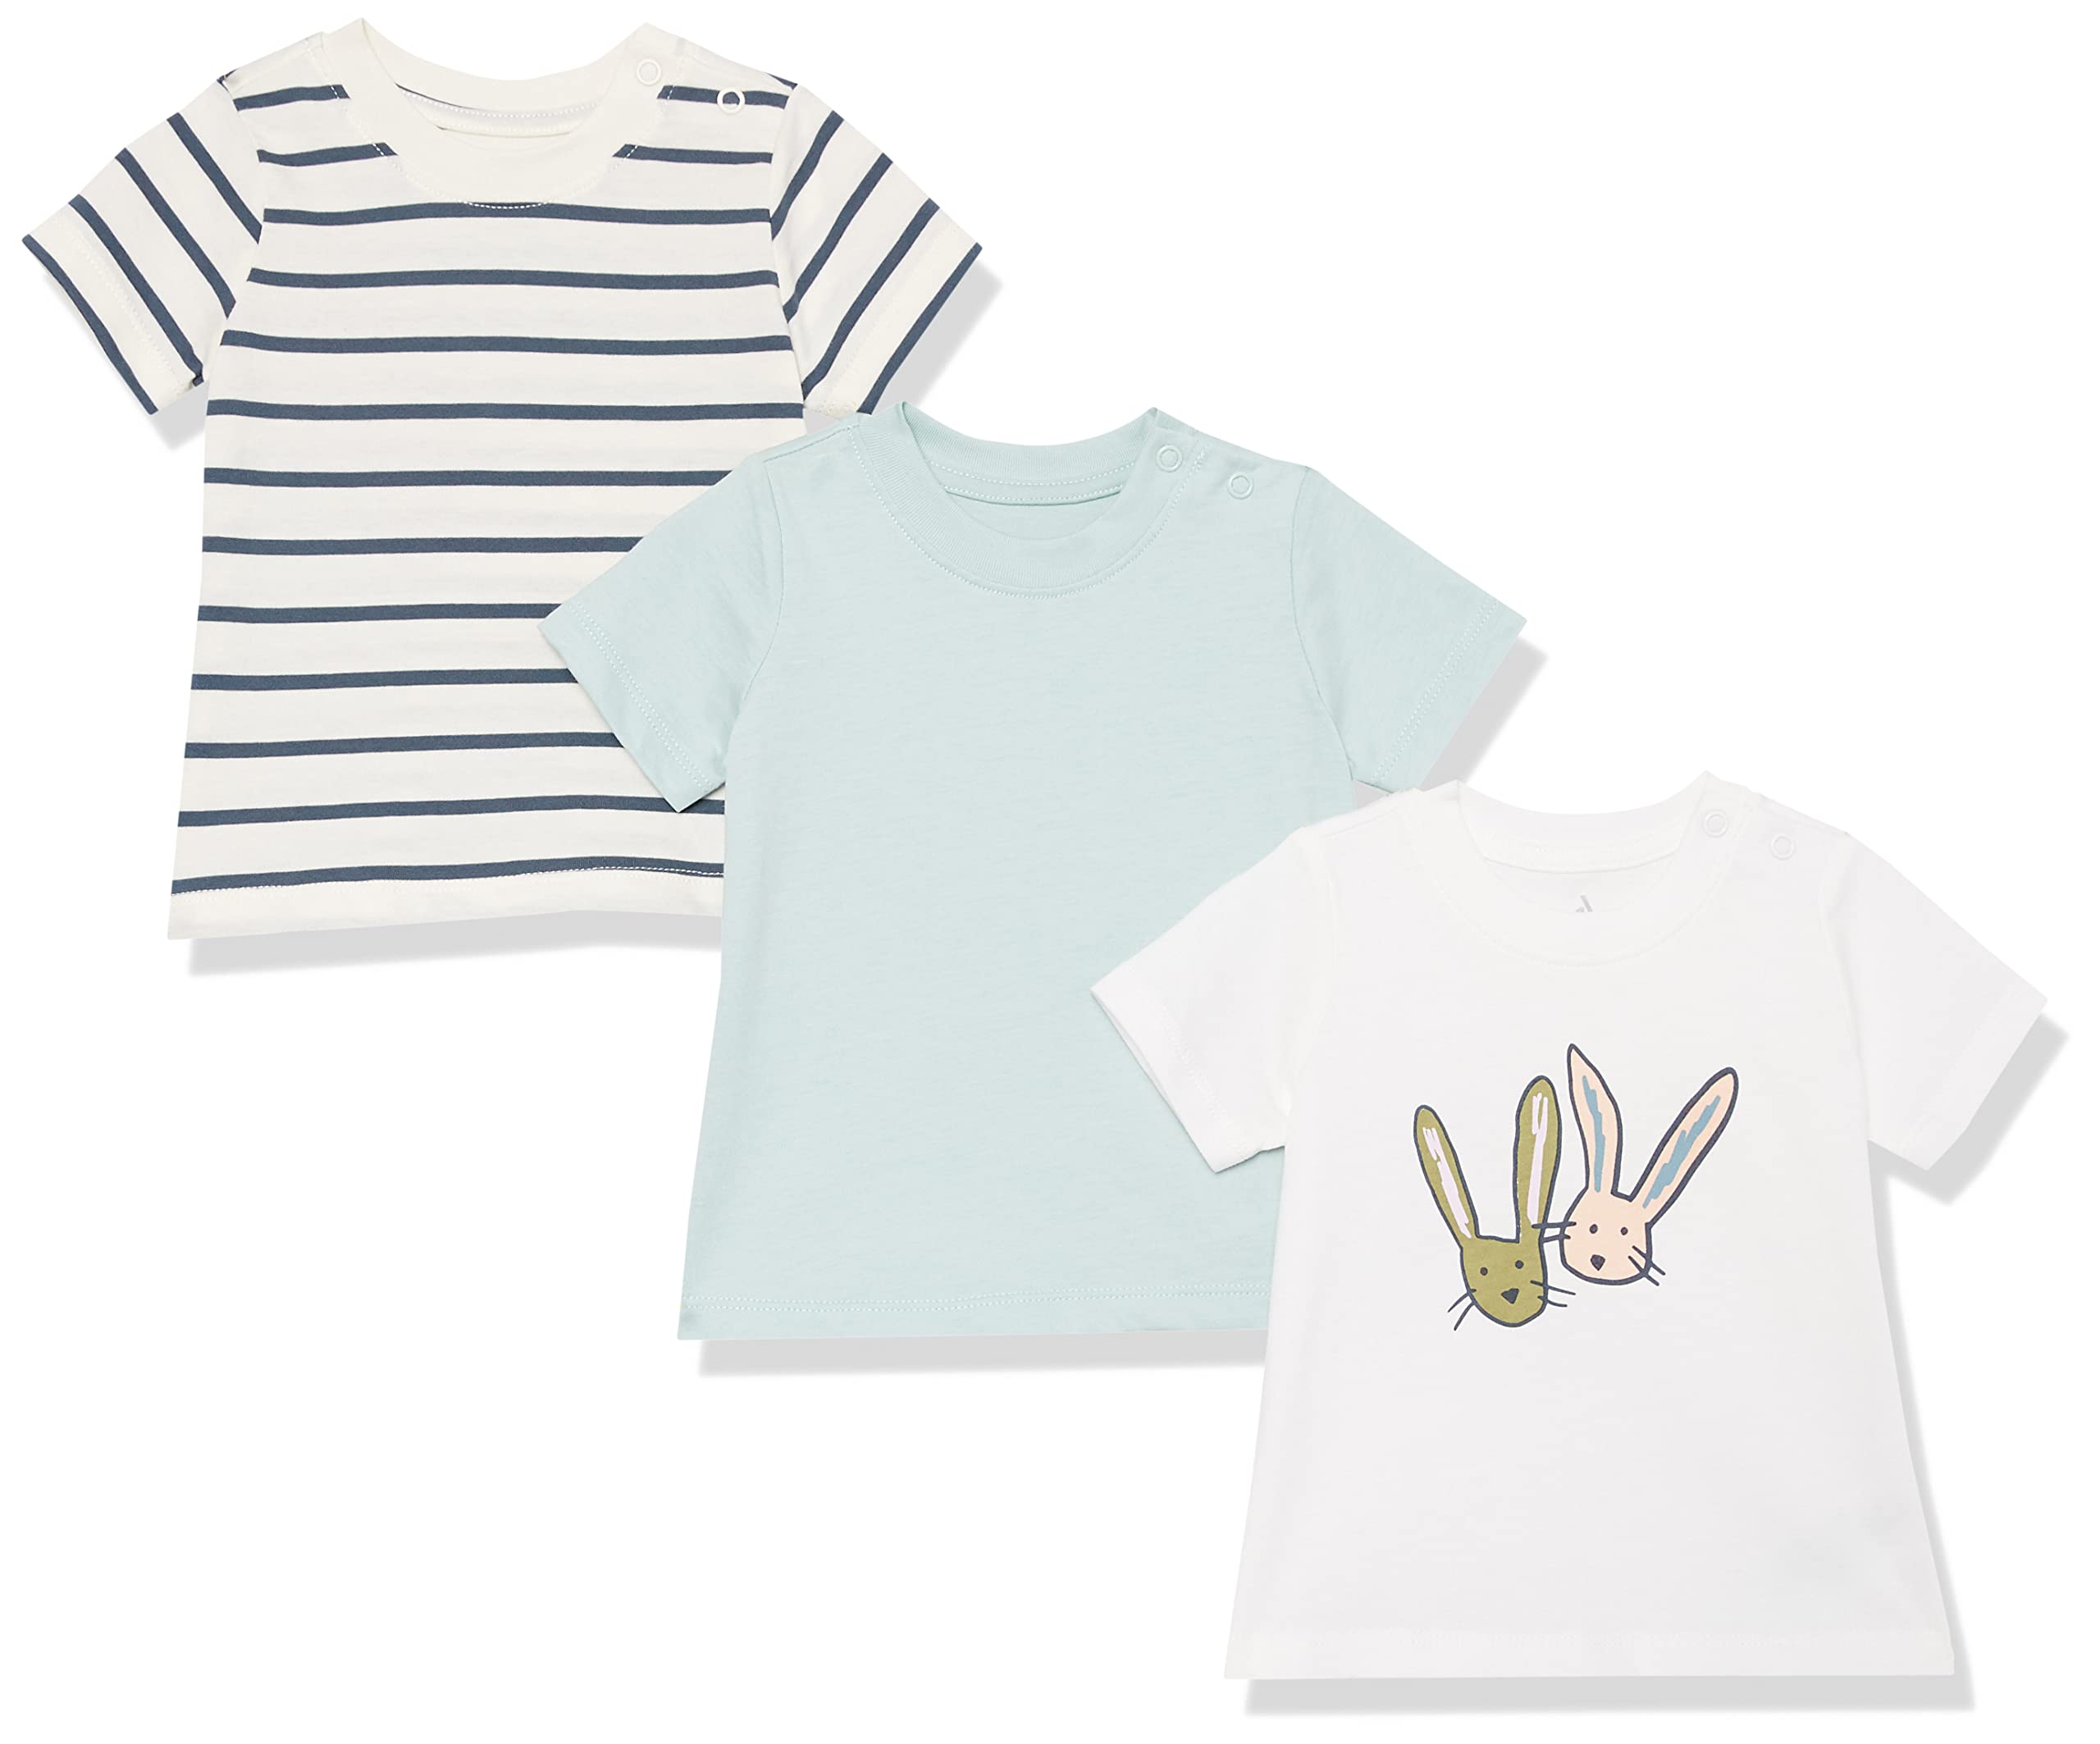 Amazon Essentials Unisex Babies' Organic Cotton Short Sleeve T-Shirt (Previously Amazon Aware), Pack of 3, Bunny/Print, 0-3 Months